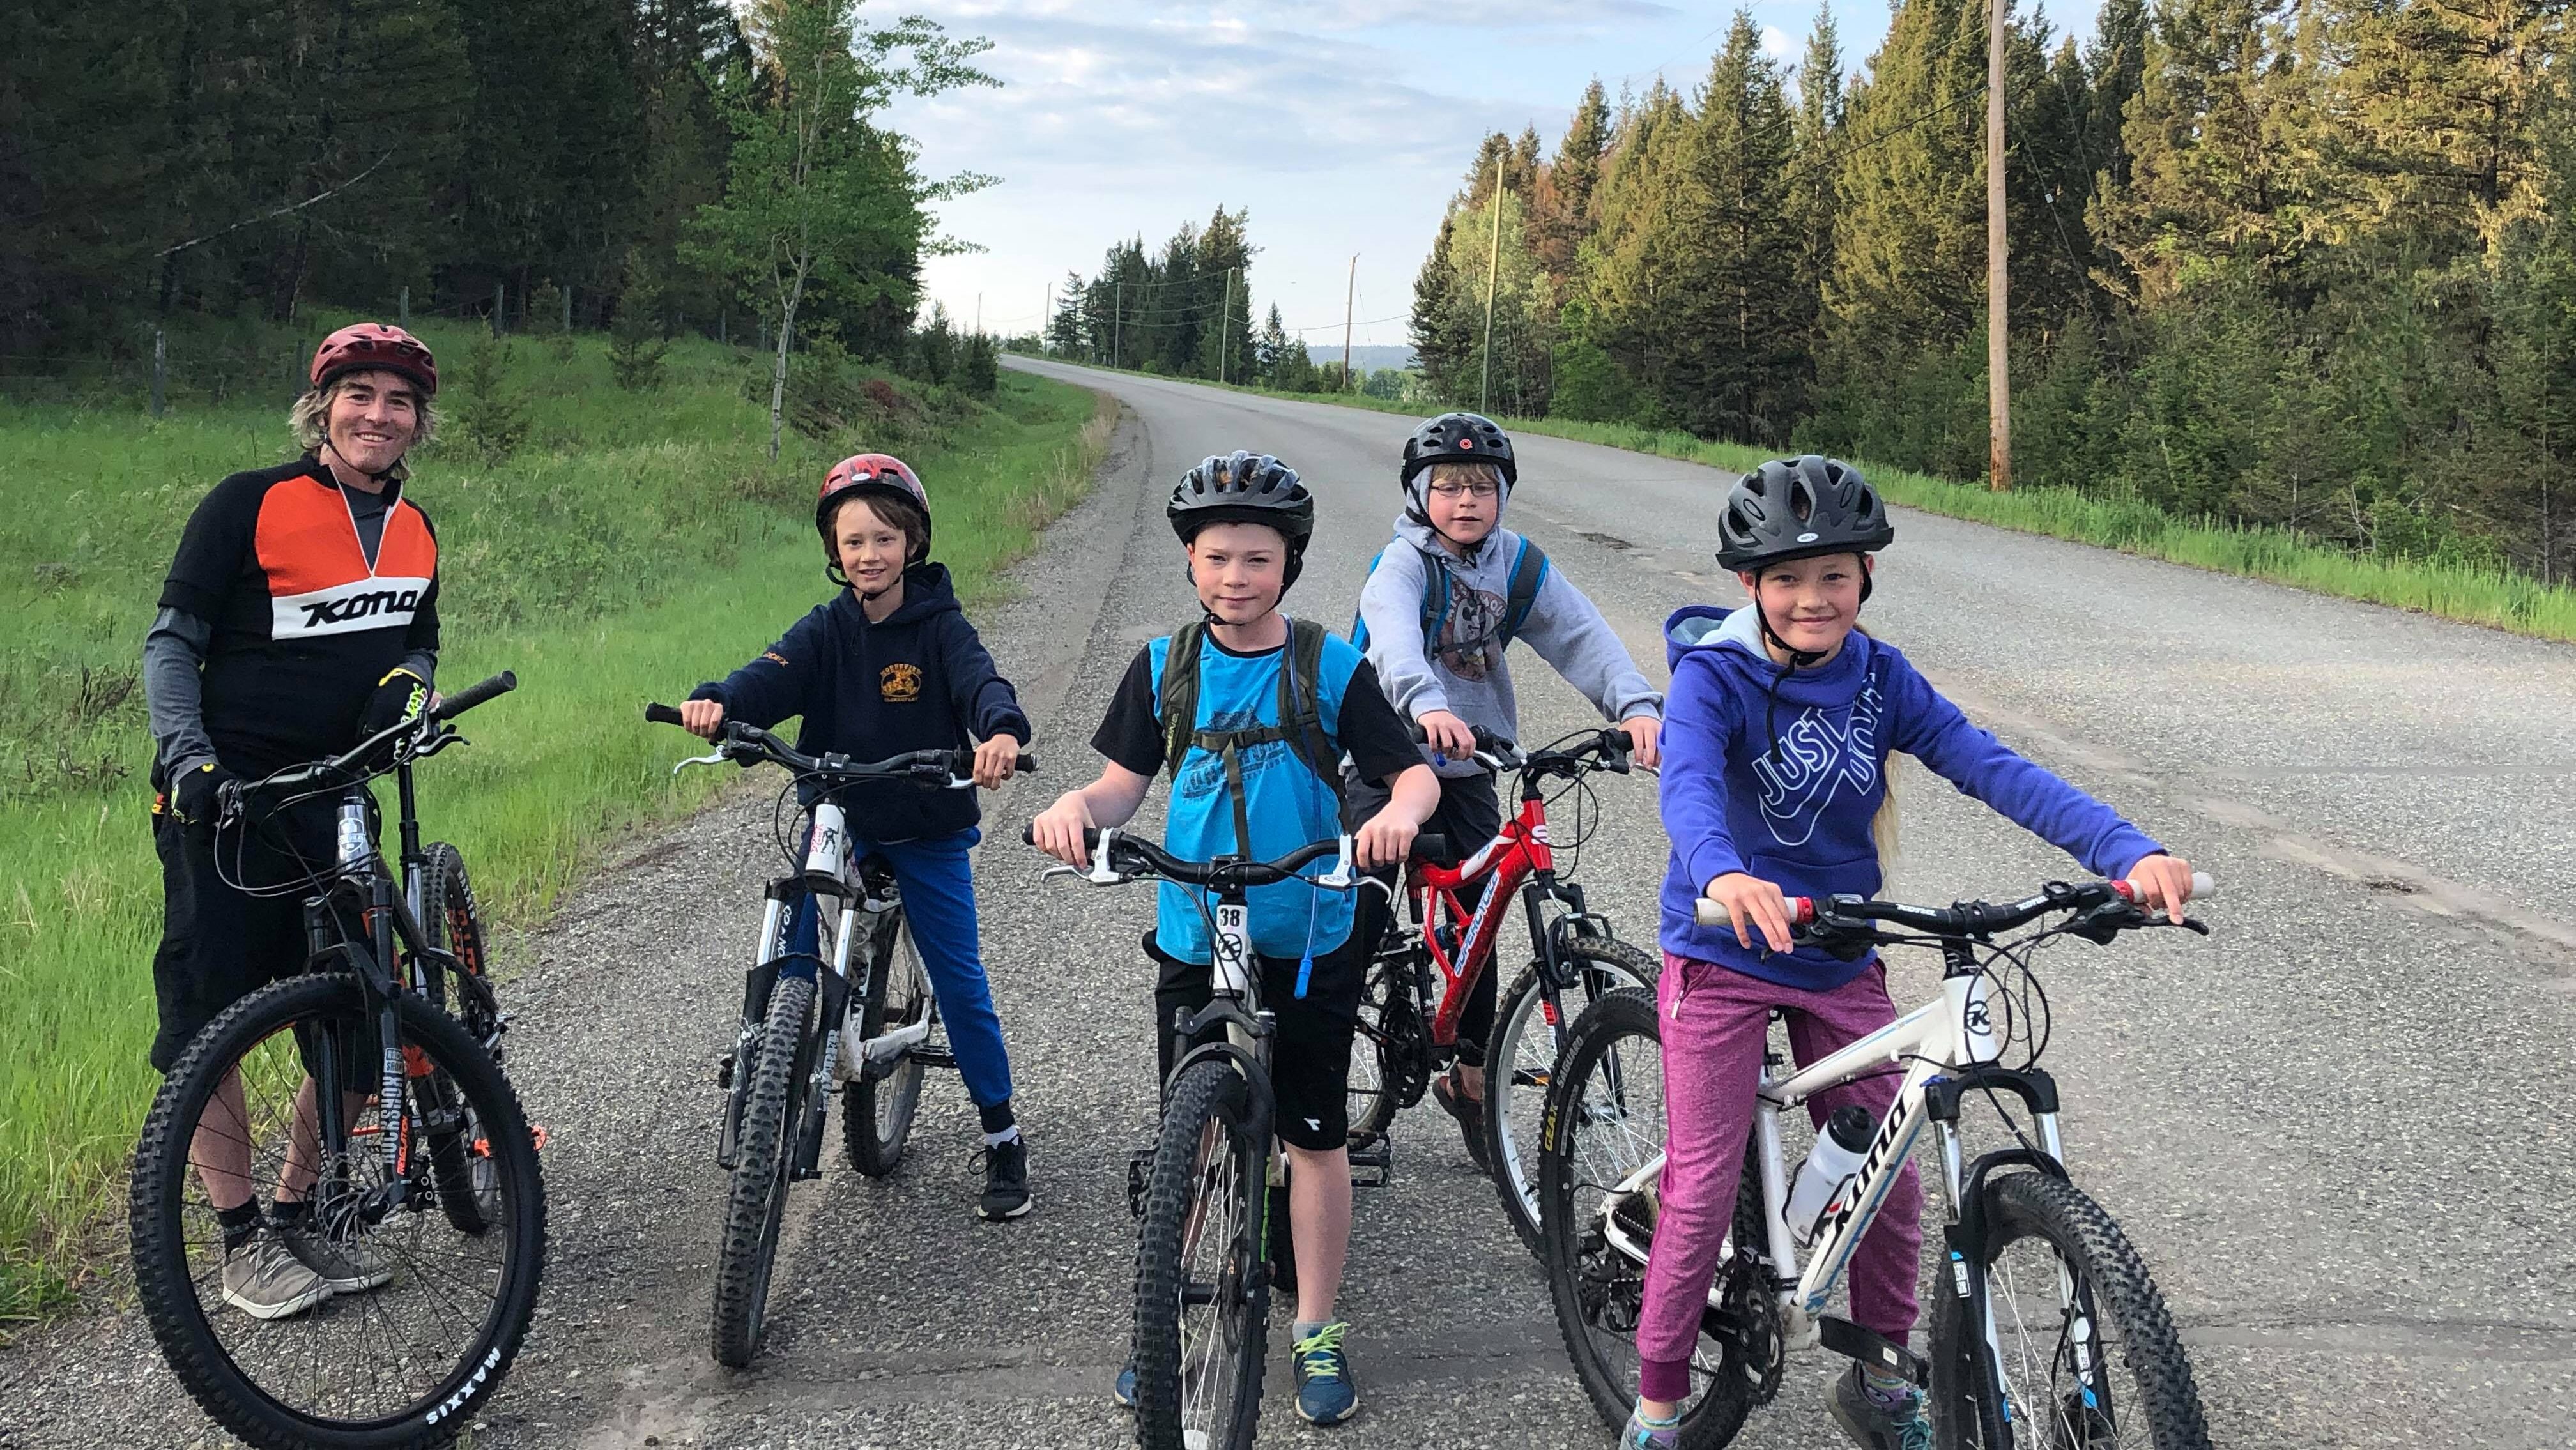 Four children and an adult smile at the camera on their bikes with helmets.